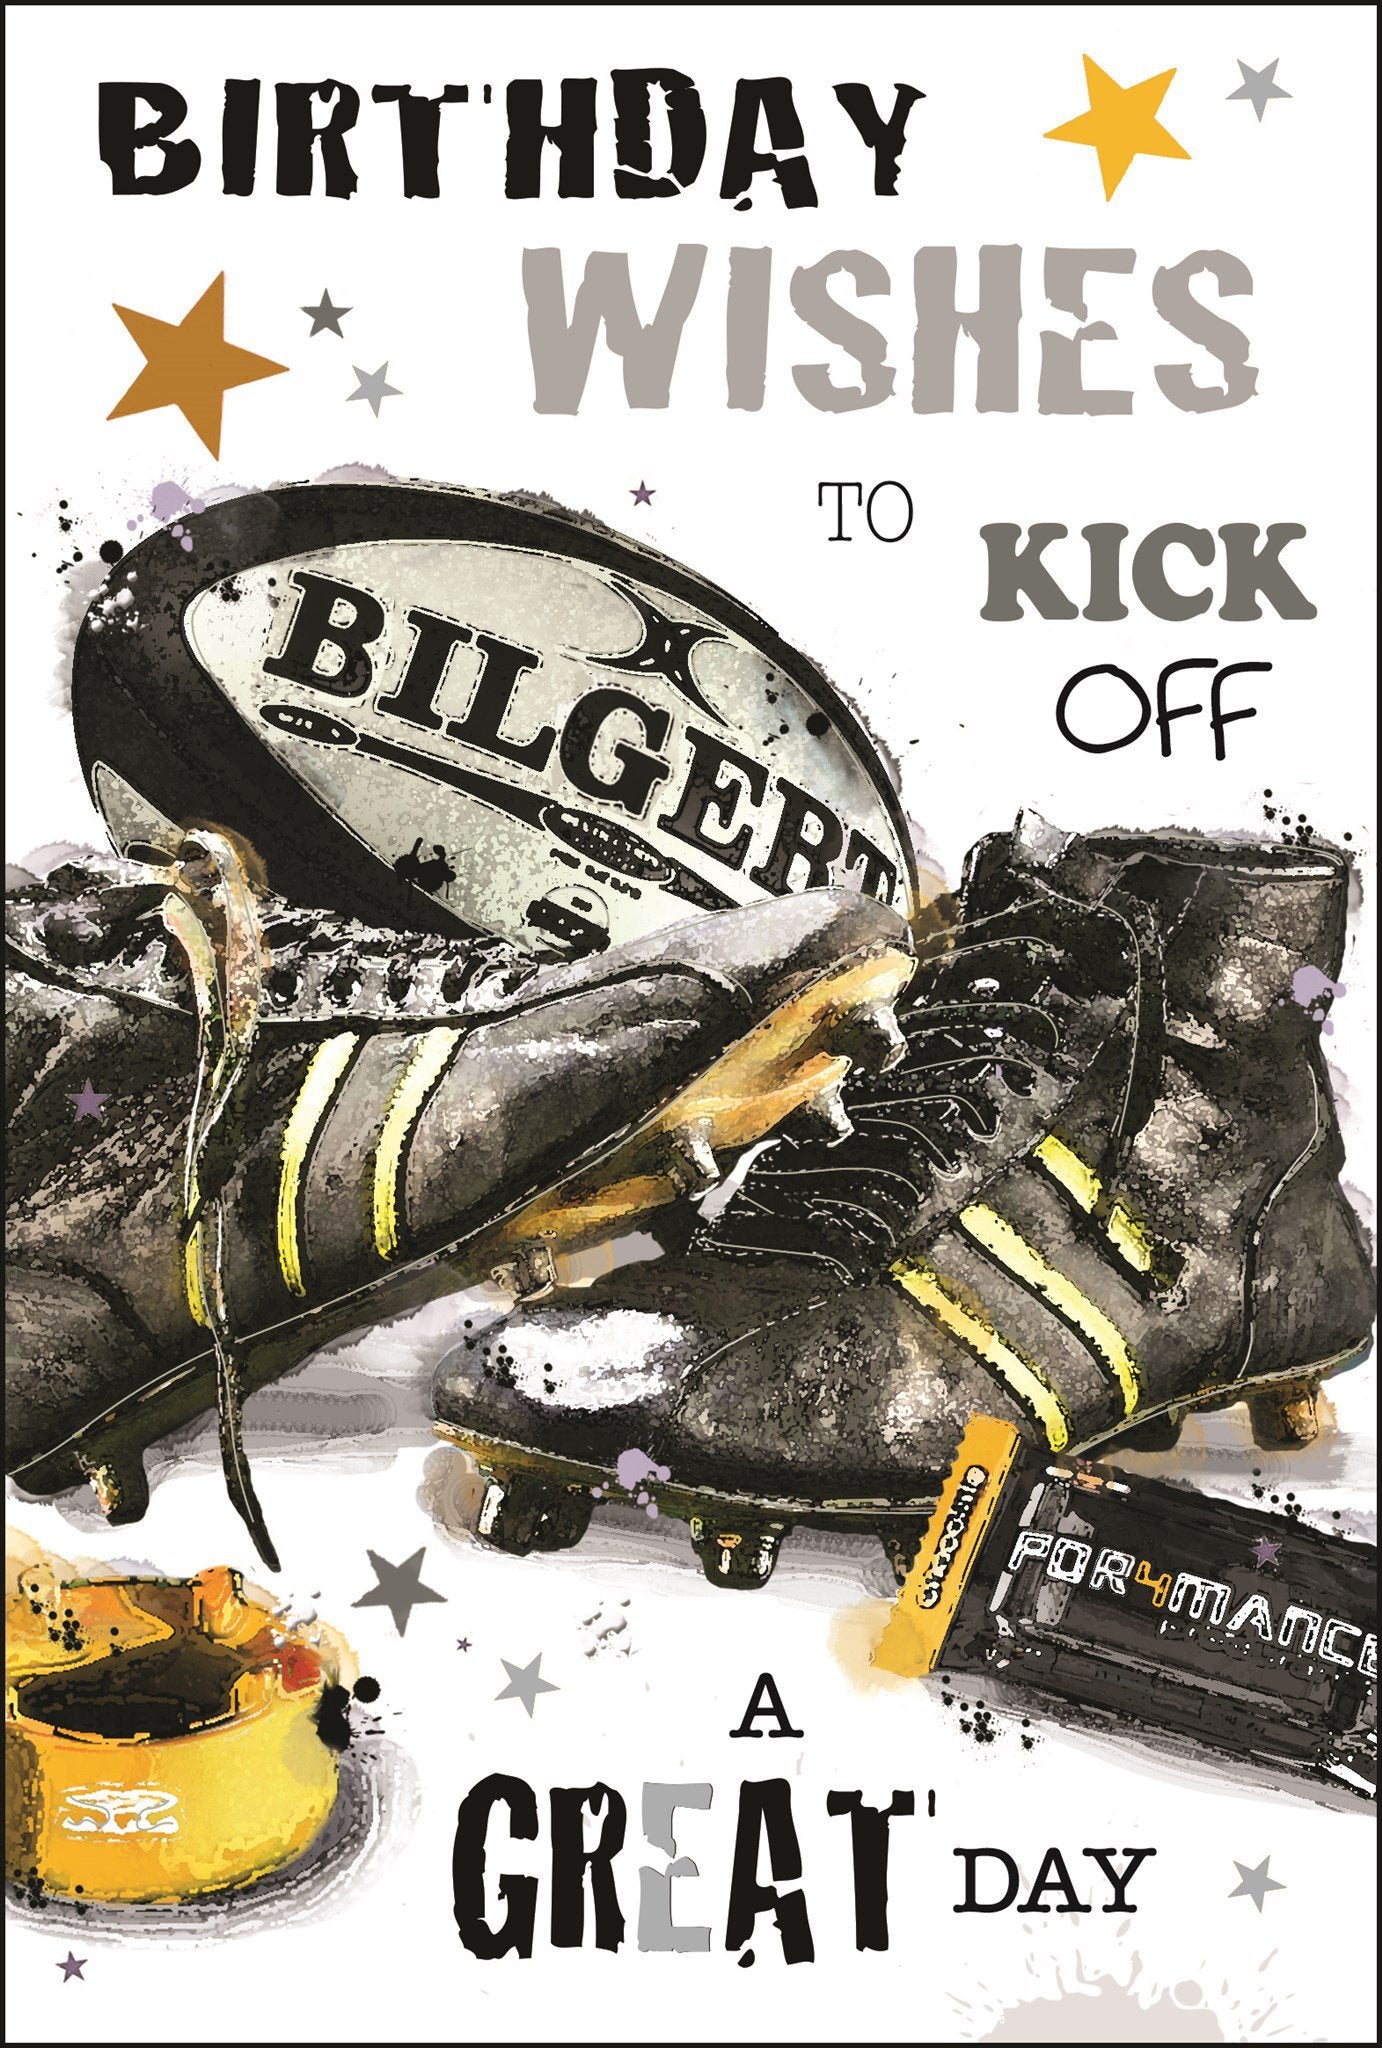 Front of Birthday Wishes Rugby Card